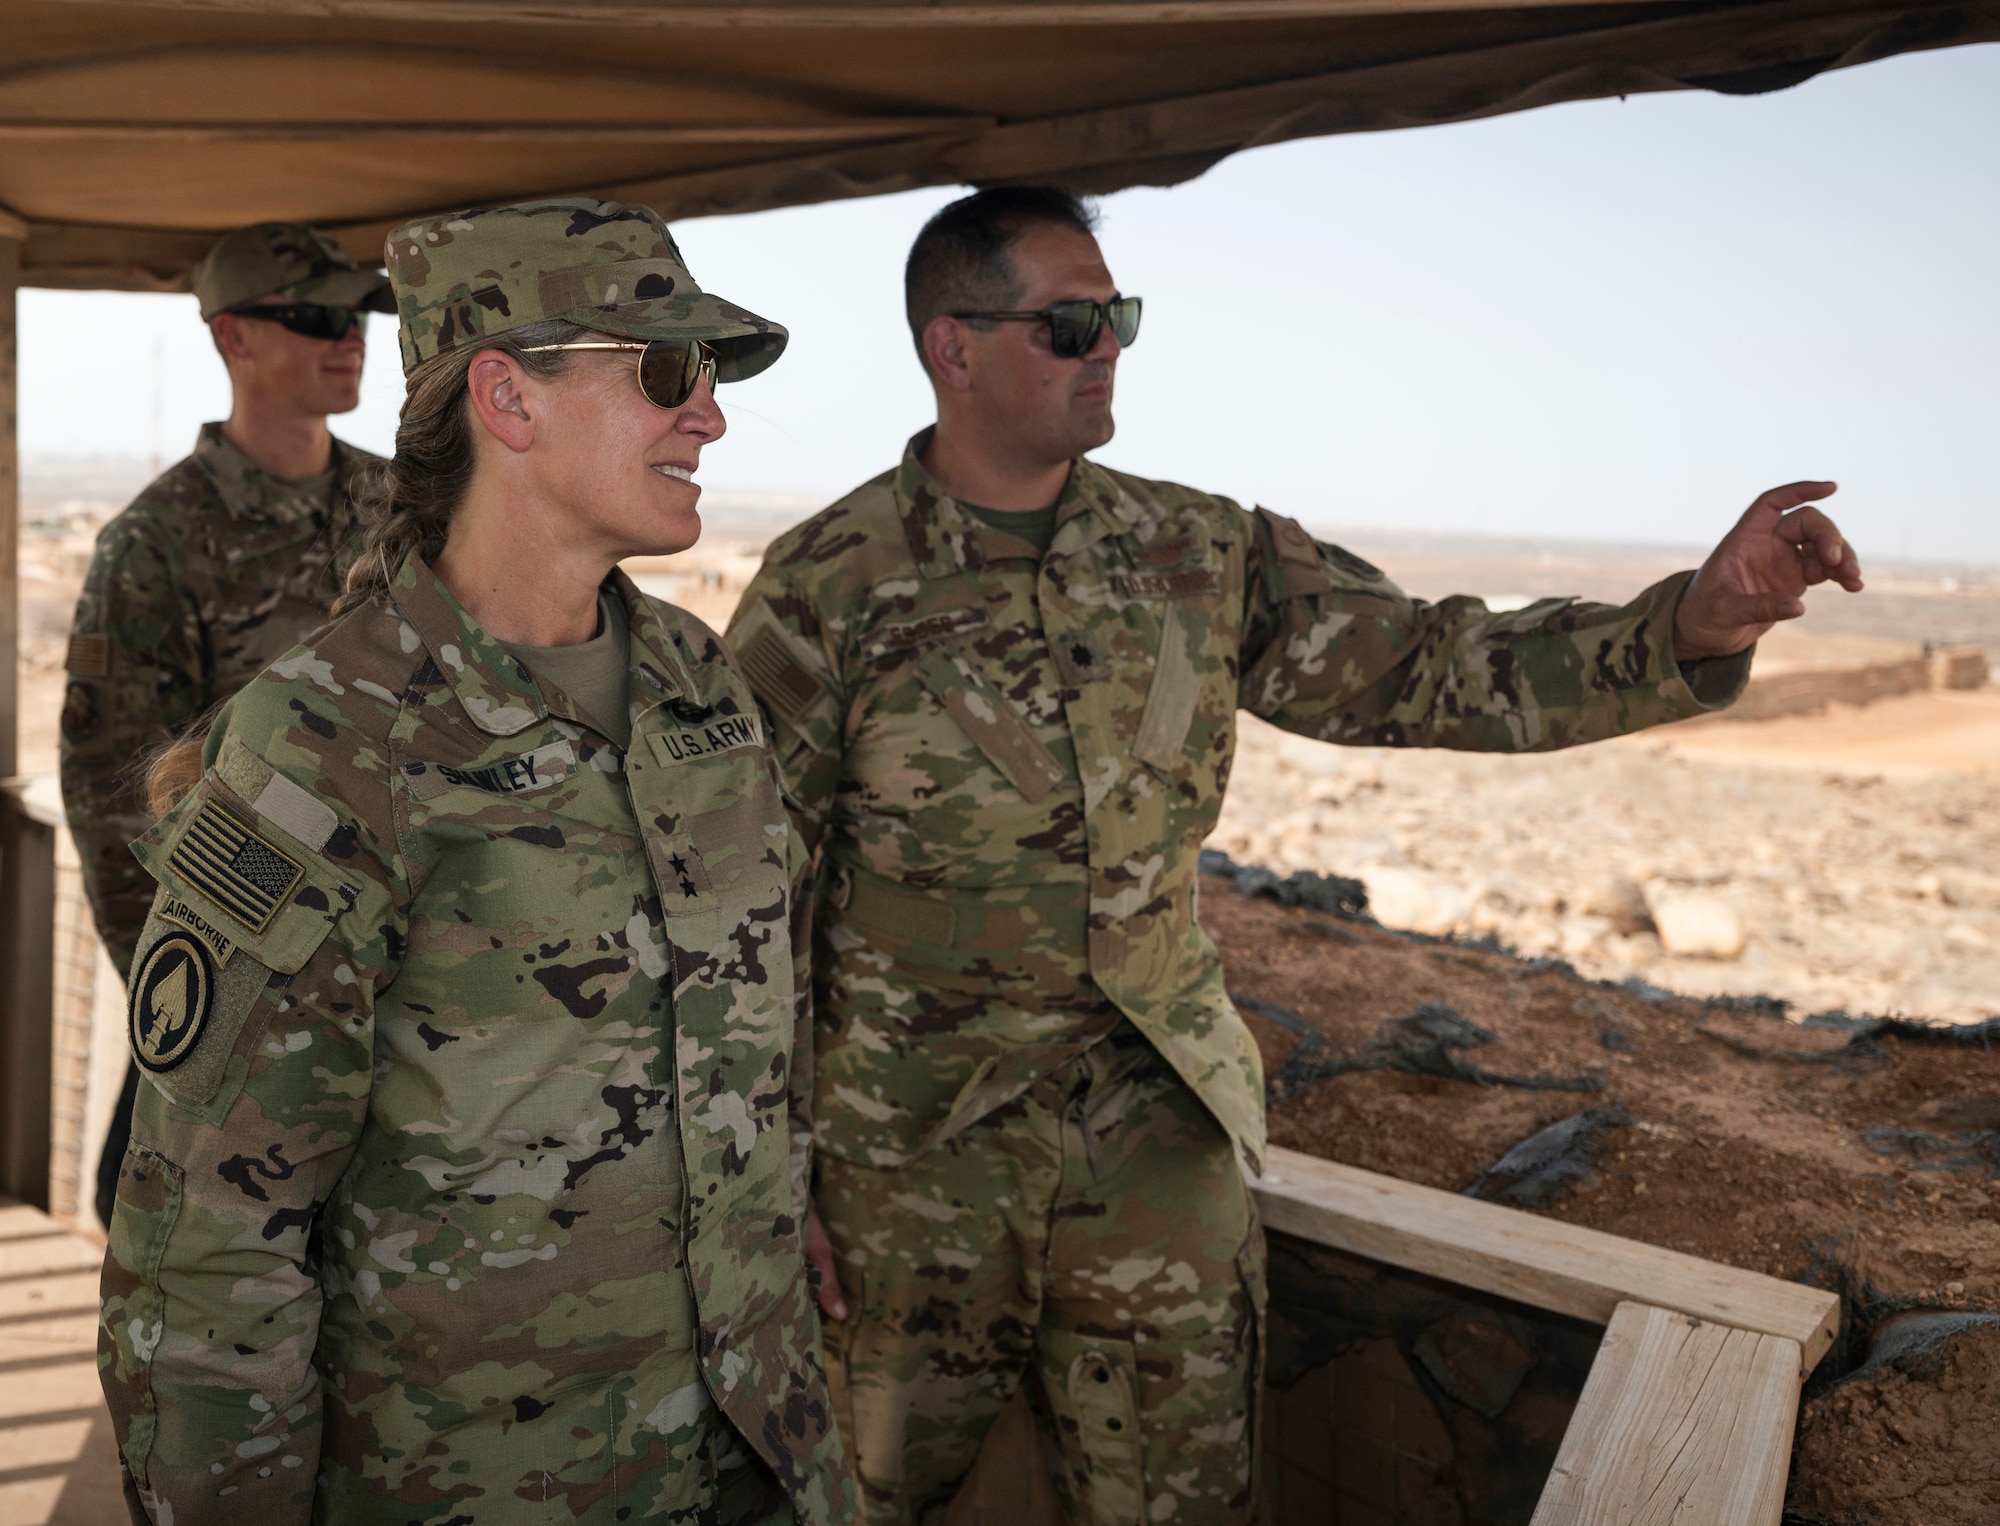 U.S. Army Maj. Gen. Jami Shawley, commander of Combined Joint Task Force-Horn of Africa, visit Chabelley Airfield.